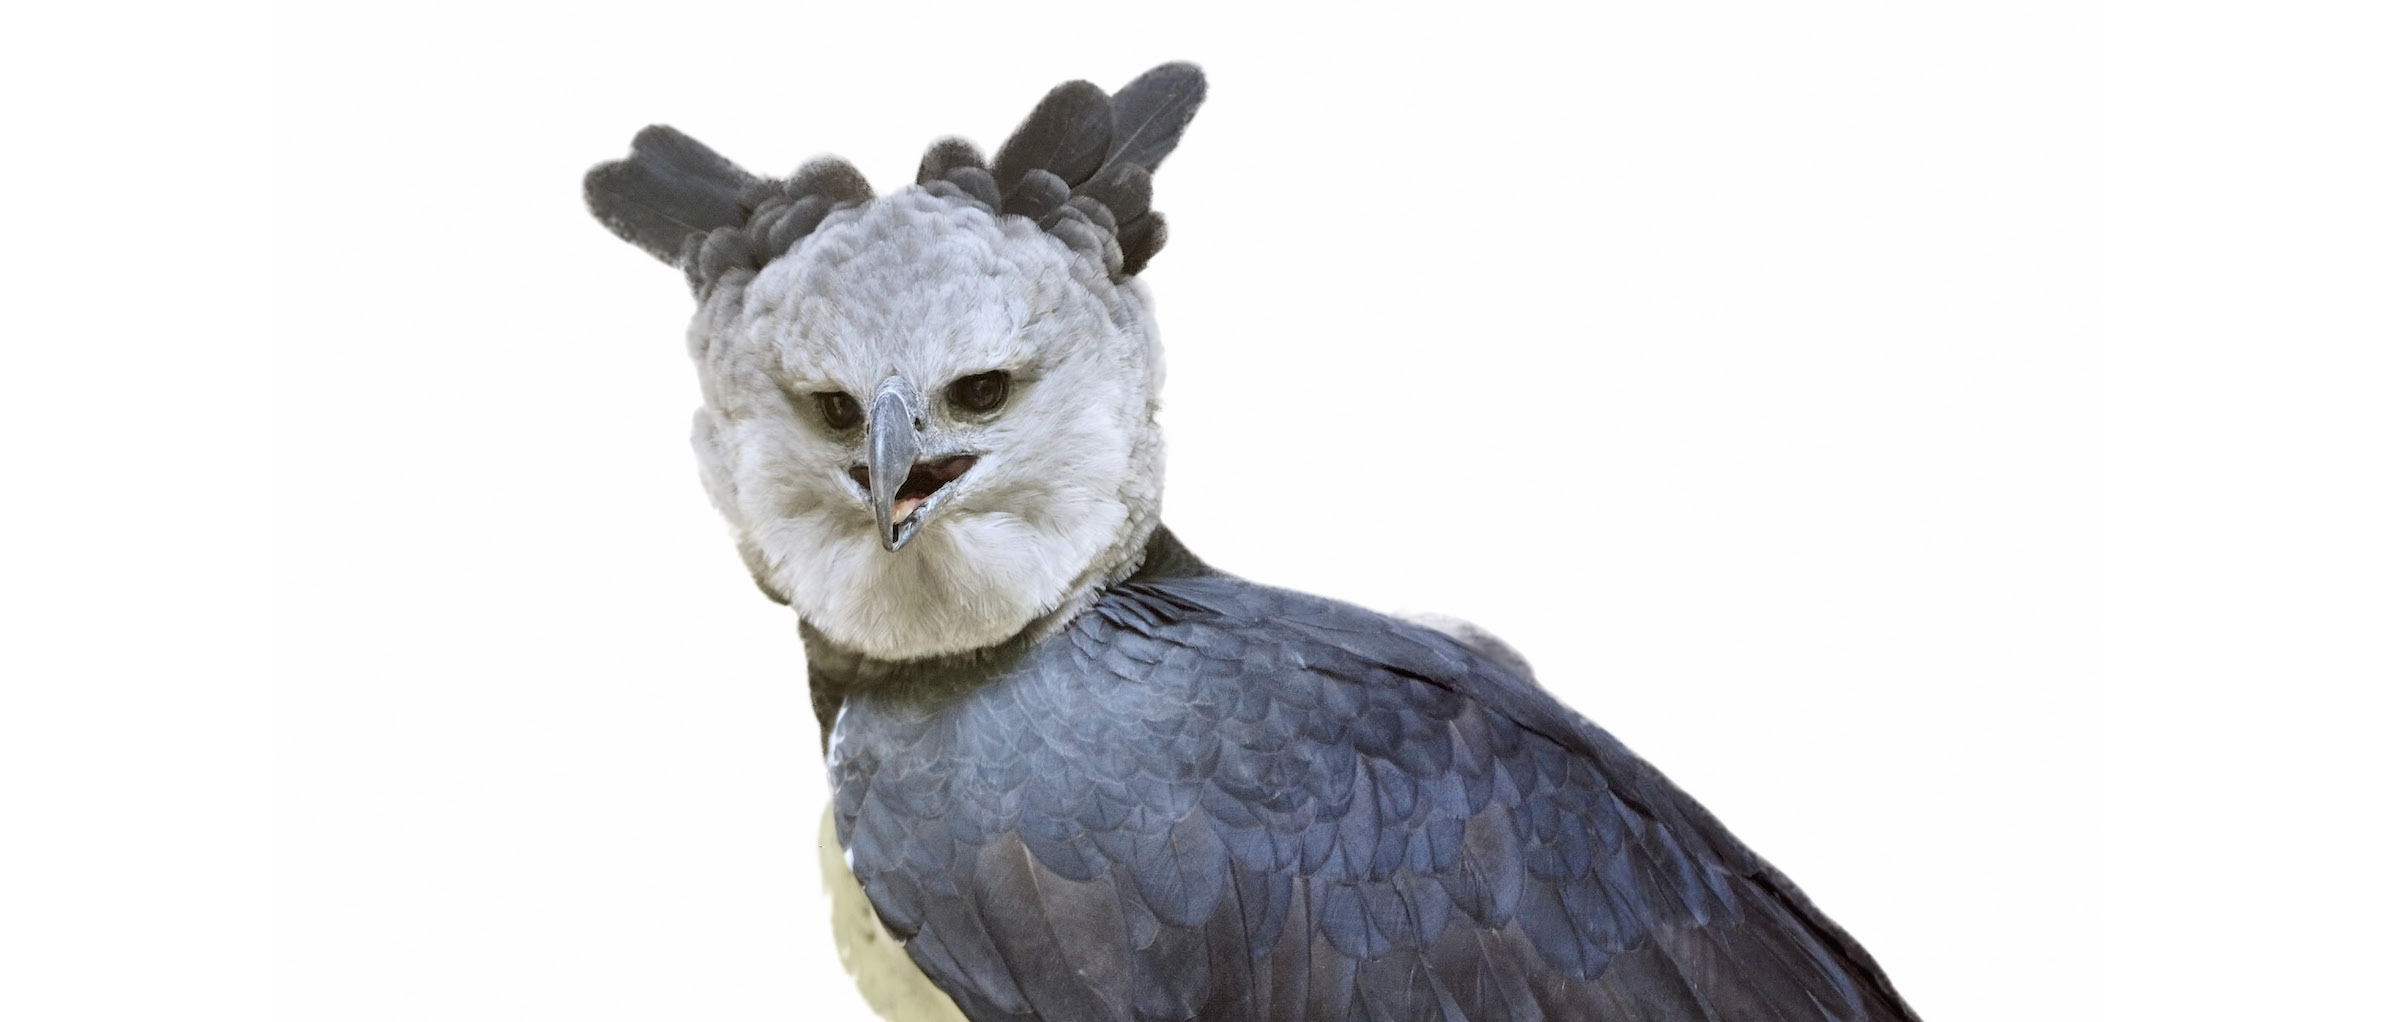 Today's bird, the Harpy Eagle. One of the largest raptors, whose